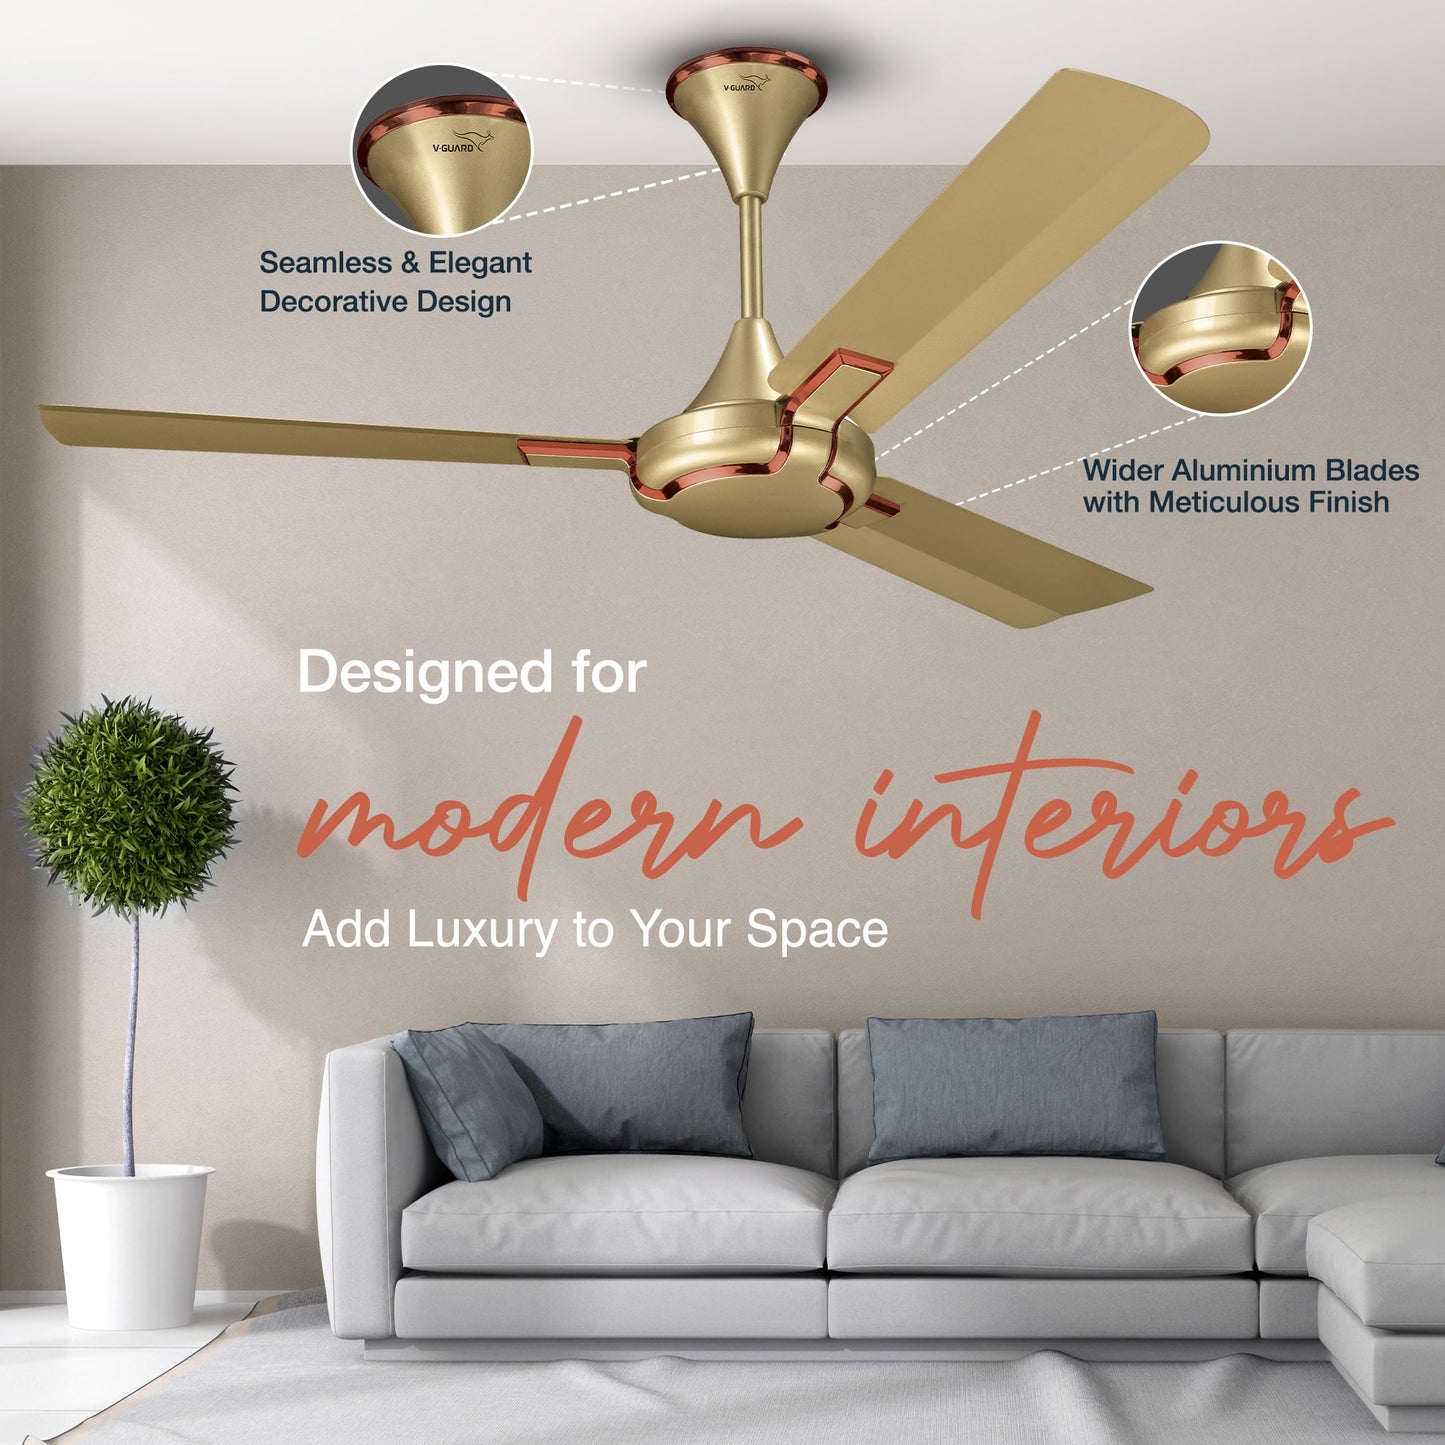 Exado Pro AS Anti Dust High Speed Ceiling Fan for Home 1.2 m, Imperial Gold